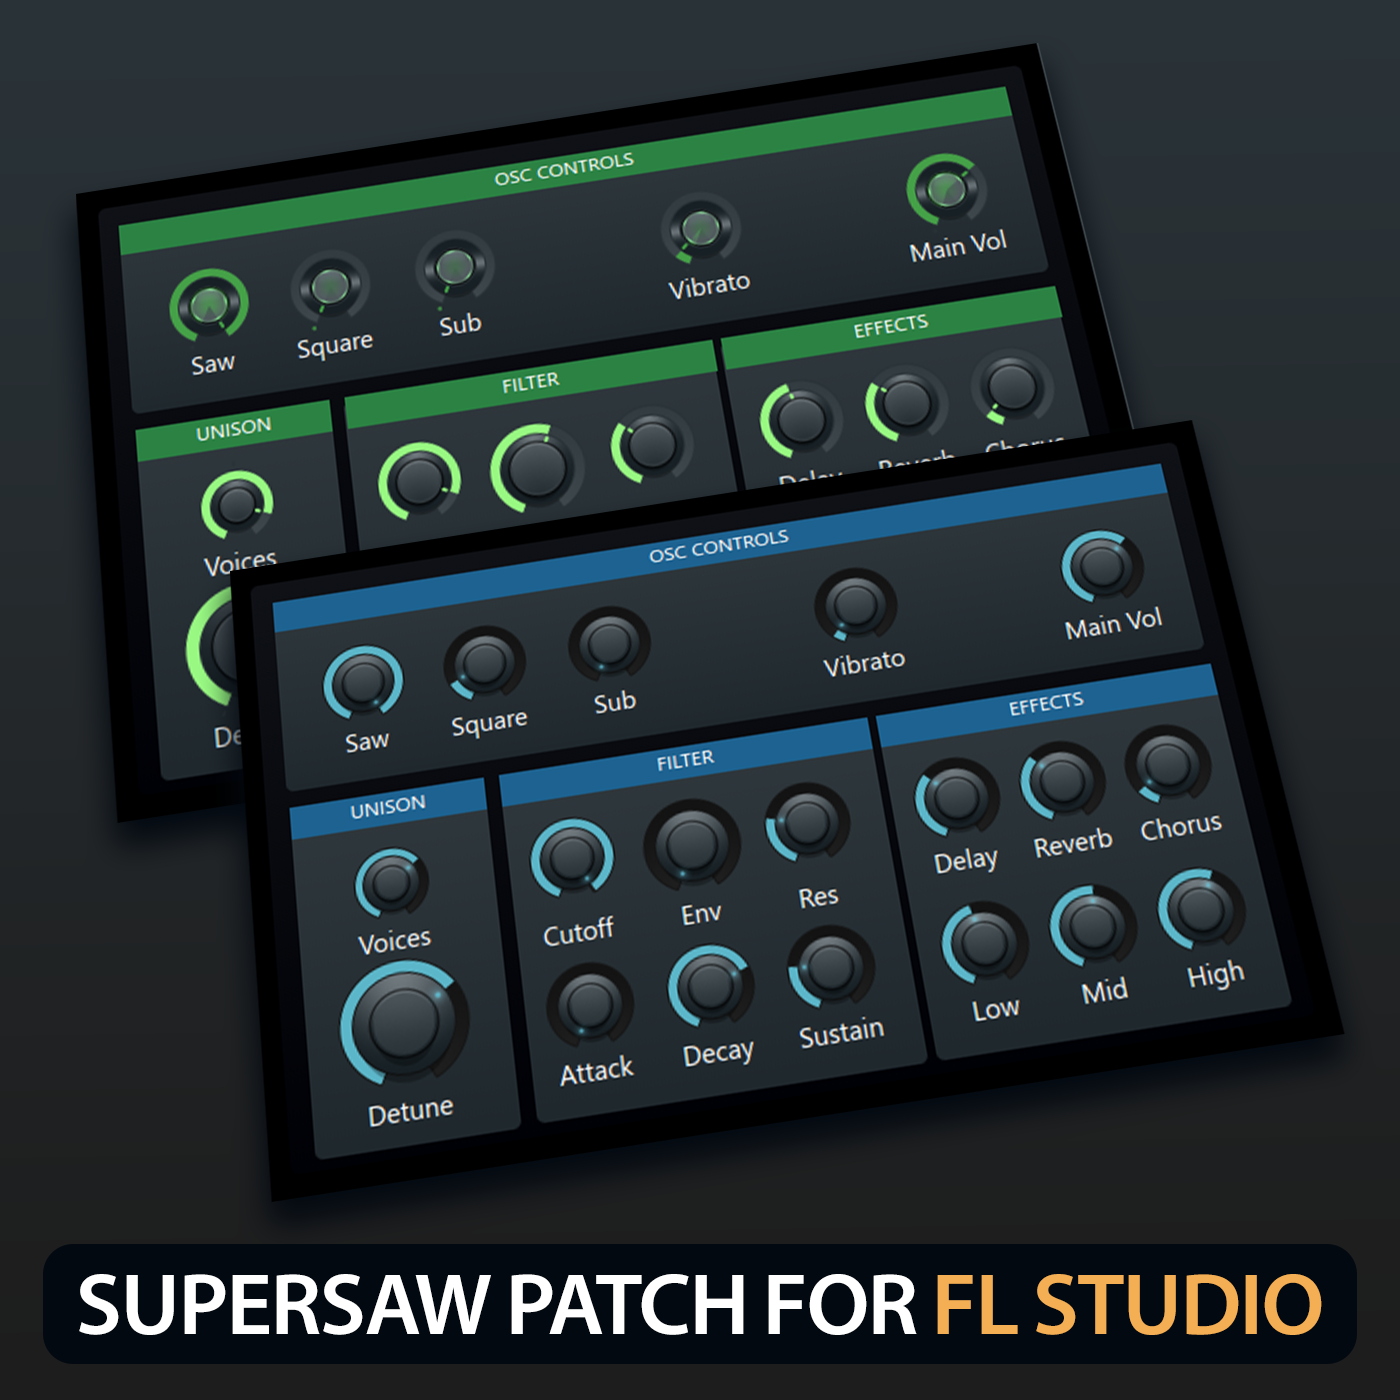 RR Supersaw Patch for FL Studio